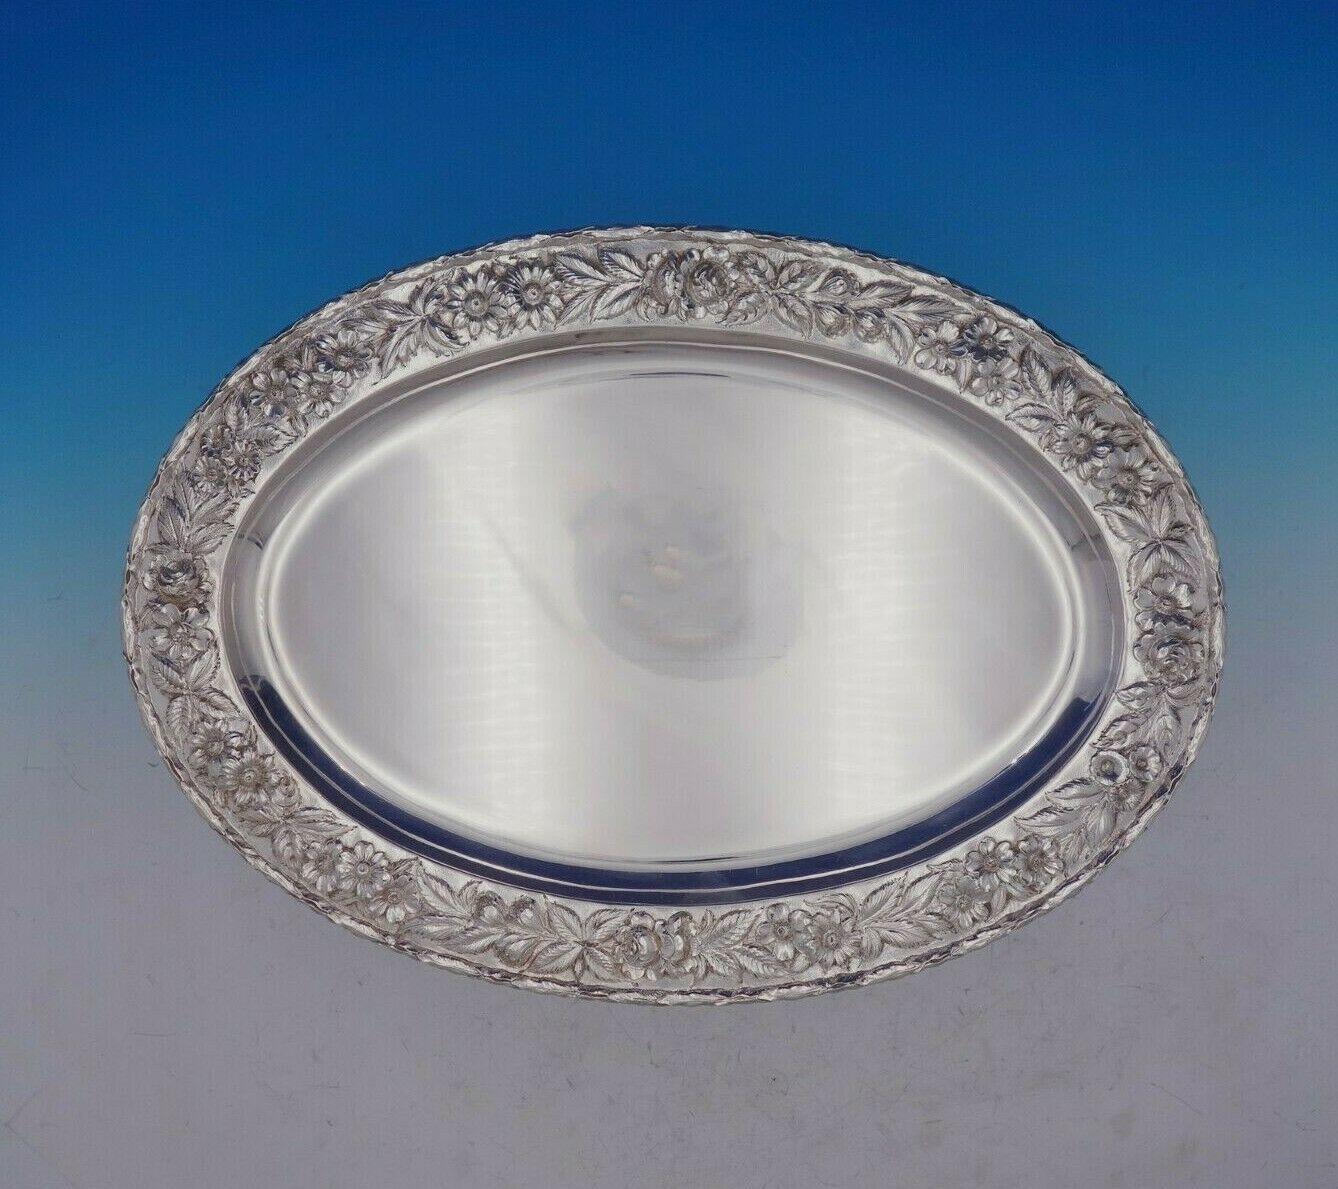 Repousse by Kirk

Lovely Repousse by Kirk sterling silver serving platter hand decorated with rose border marked #2518A. This platter measures 18